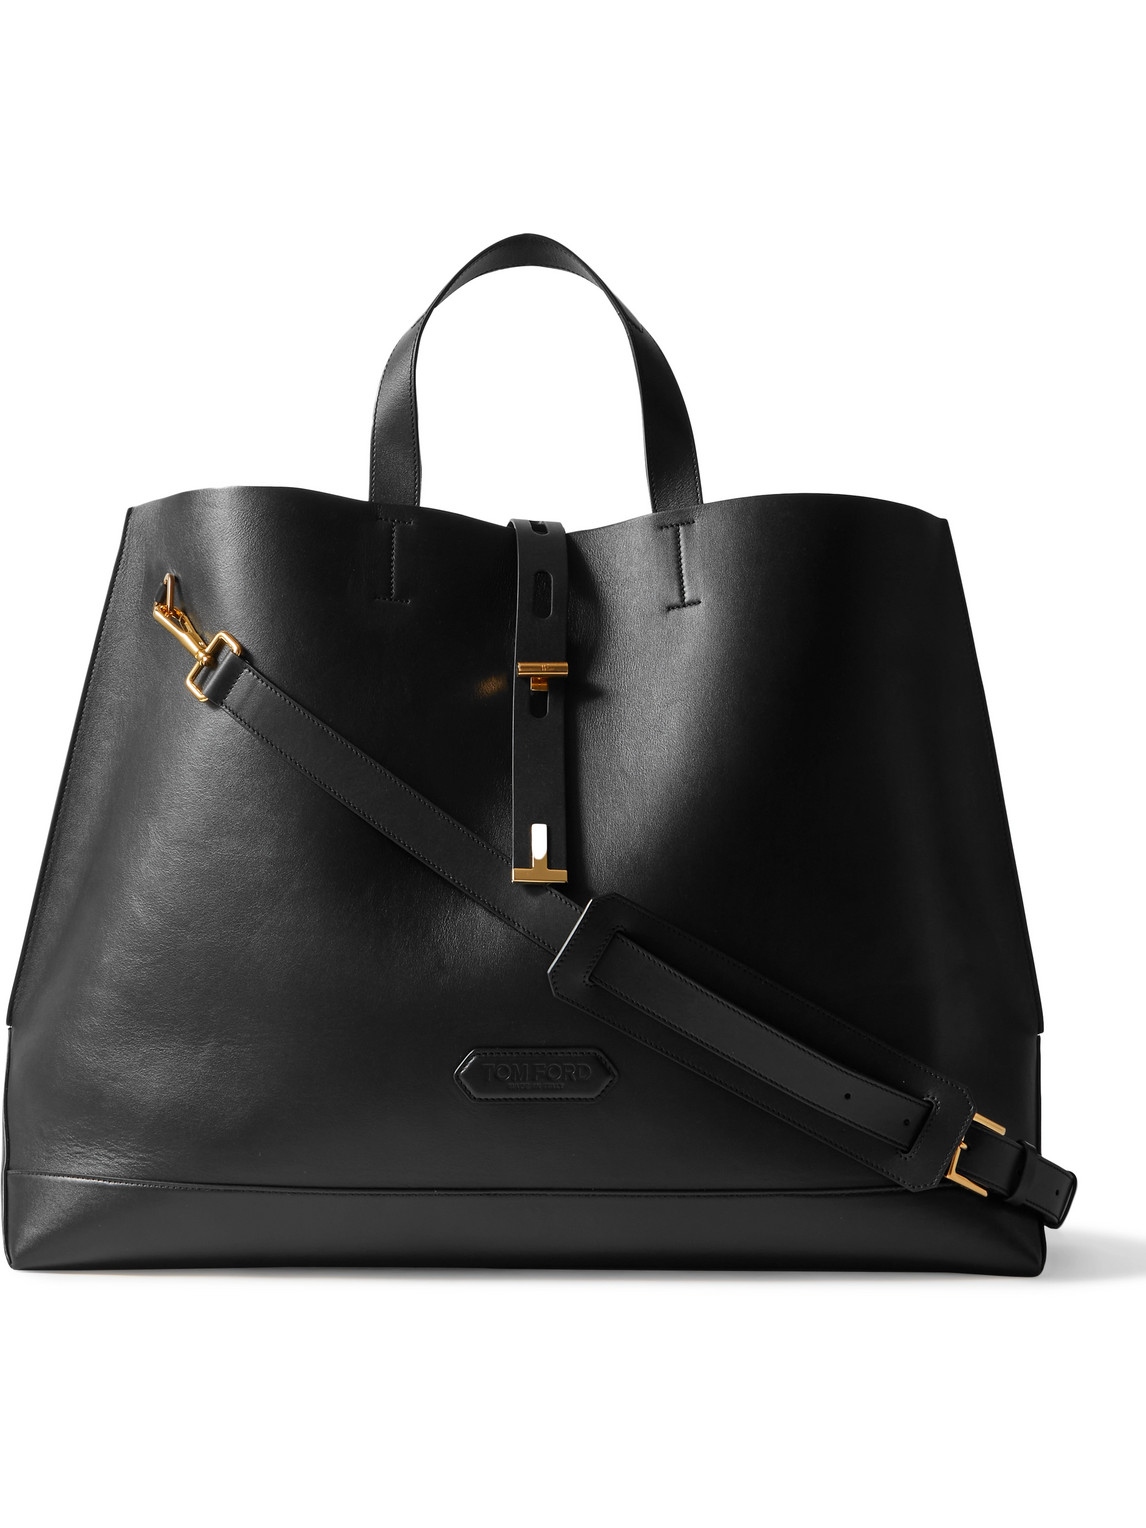 TOM FORD LEATHER TOTE BAG